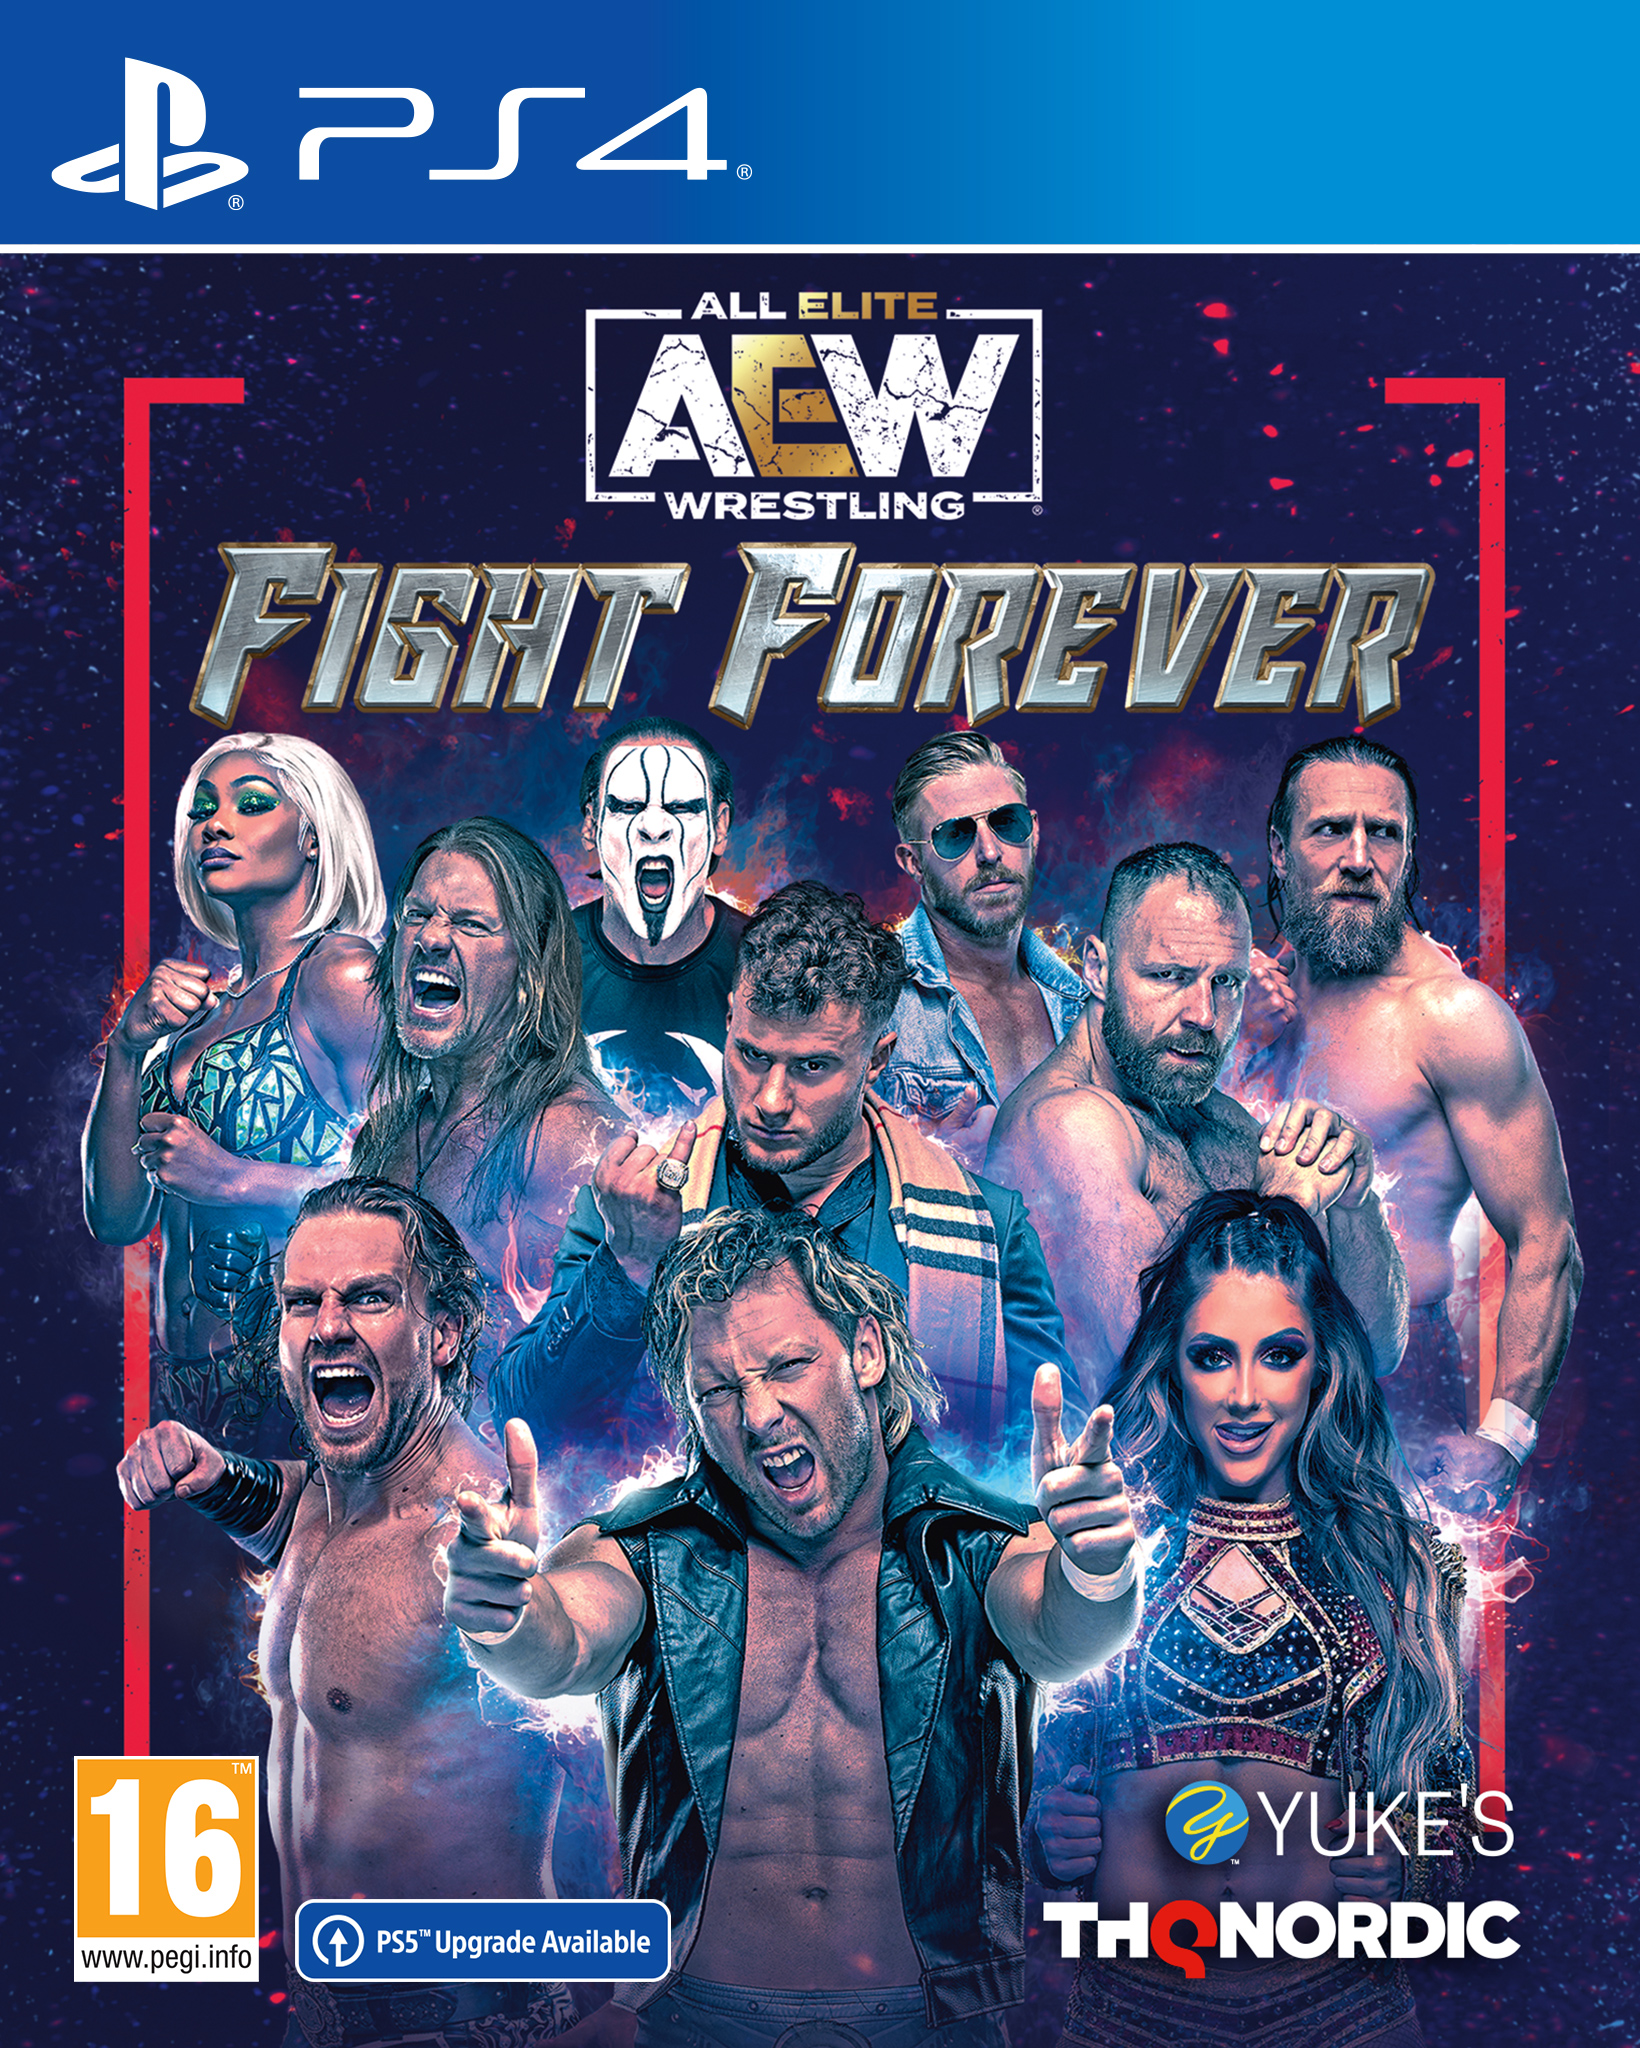 AEW Fight Forever On Steam escapeauthority